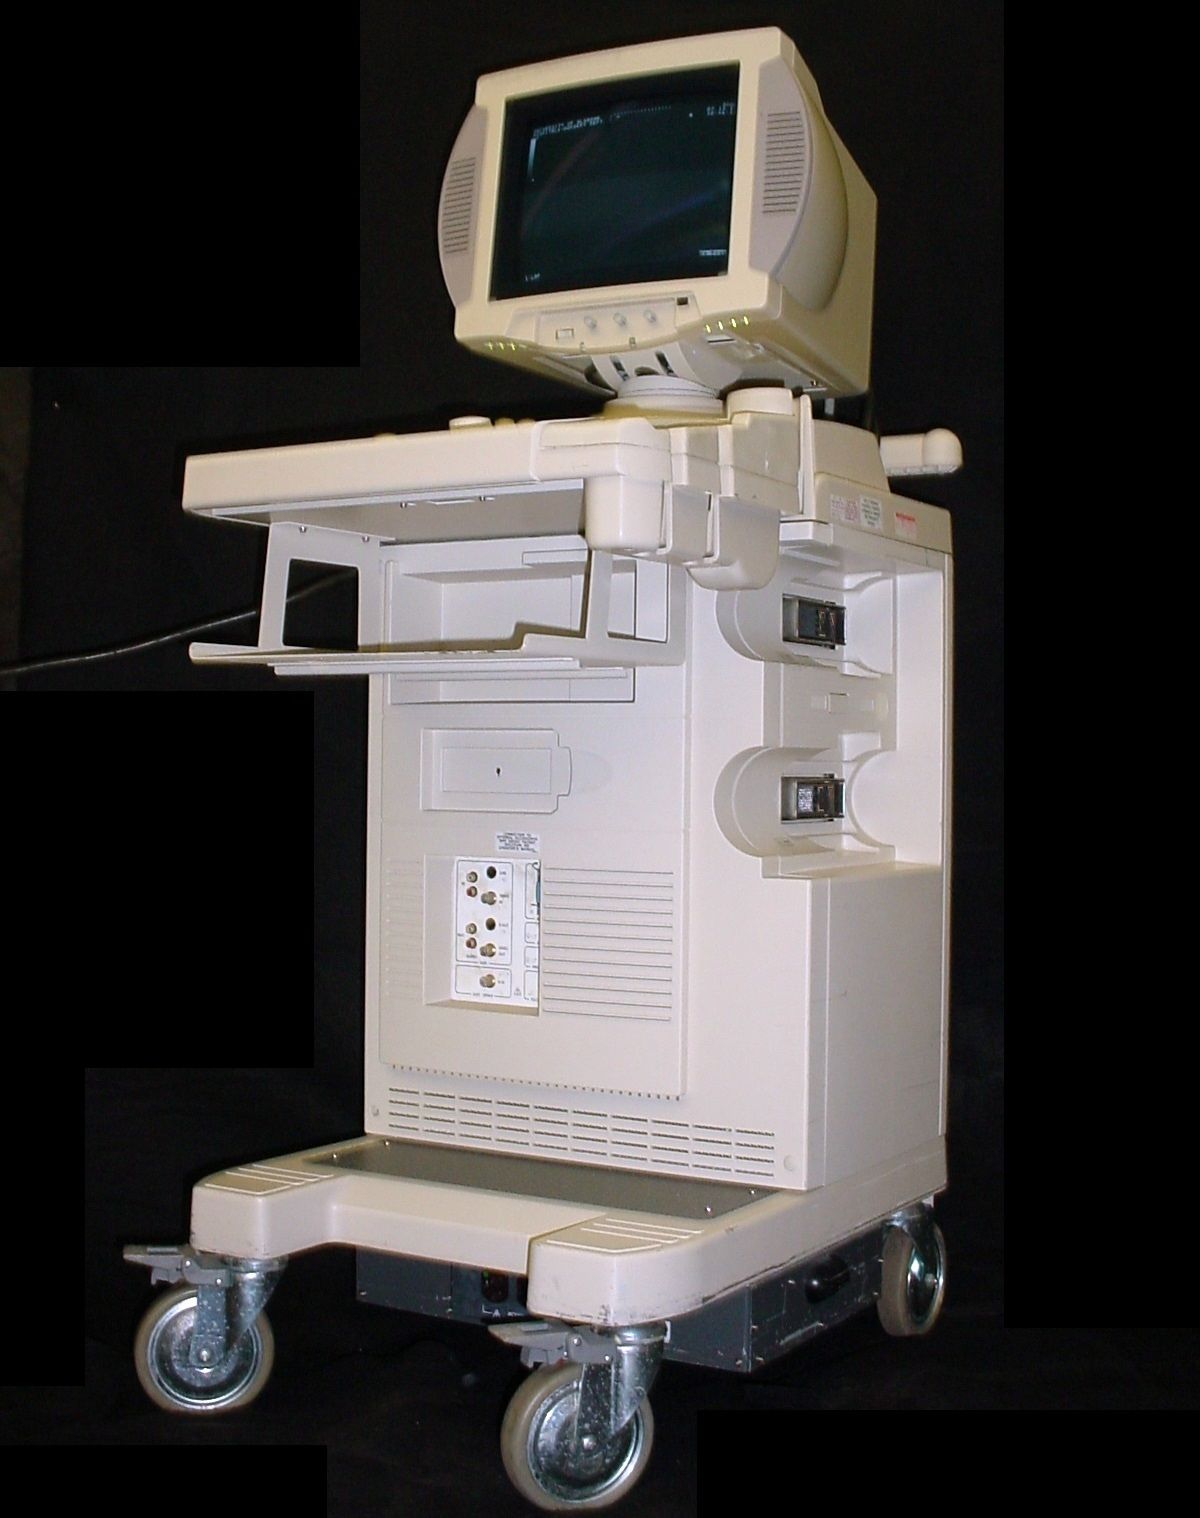 Aloka SSD-1700 DynaView 7.2 Ultrasound Machine ~ No Probes Included DIAGNOSTIC ULTRASOUND MACHINES FOR SALE